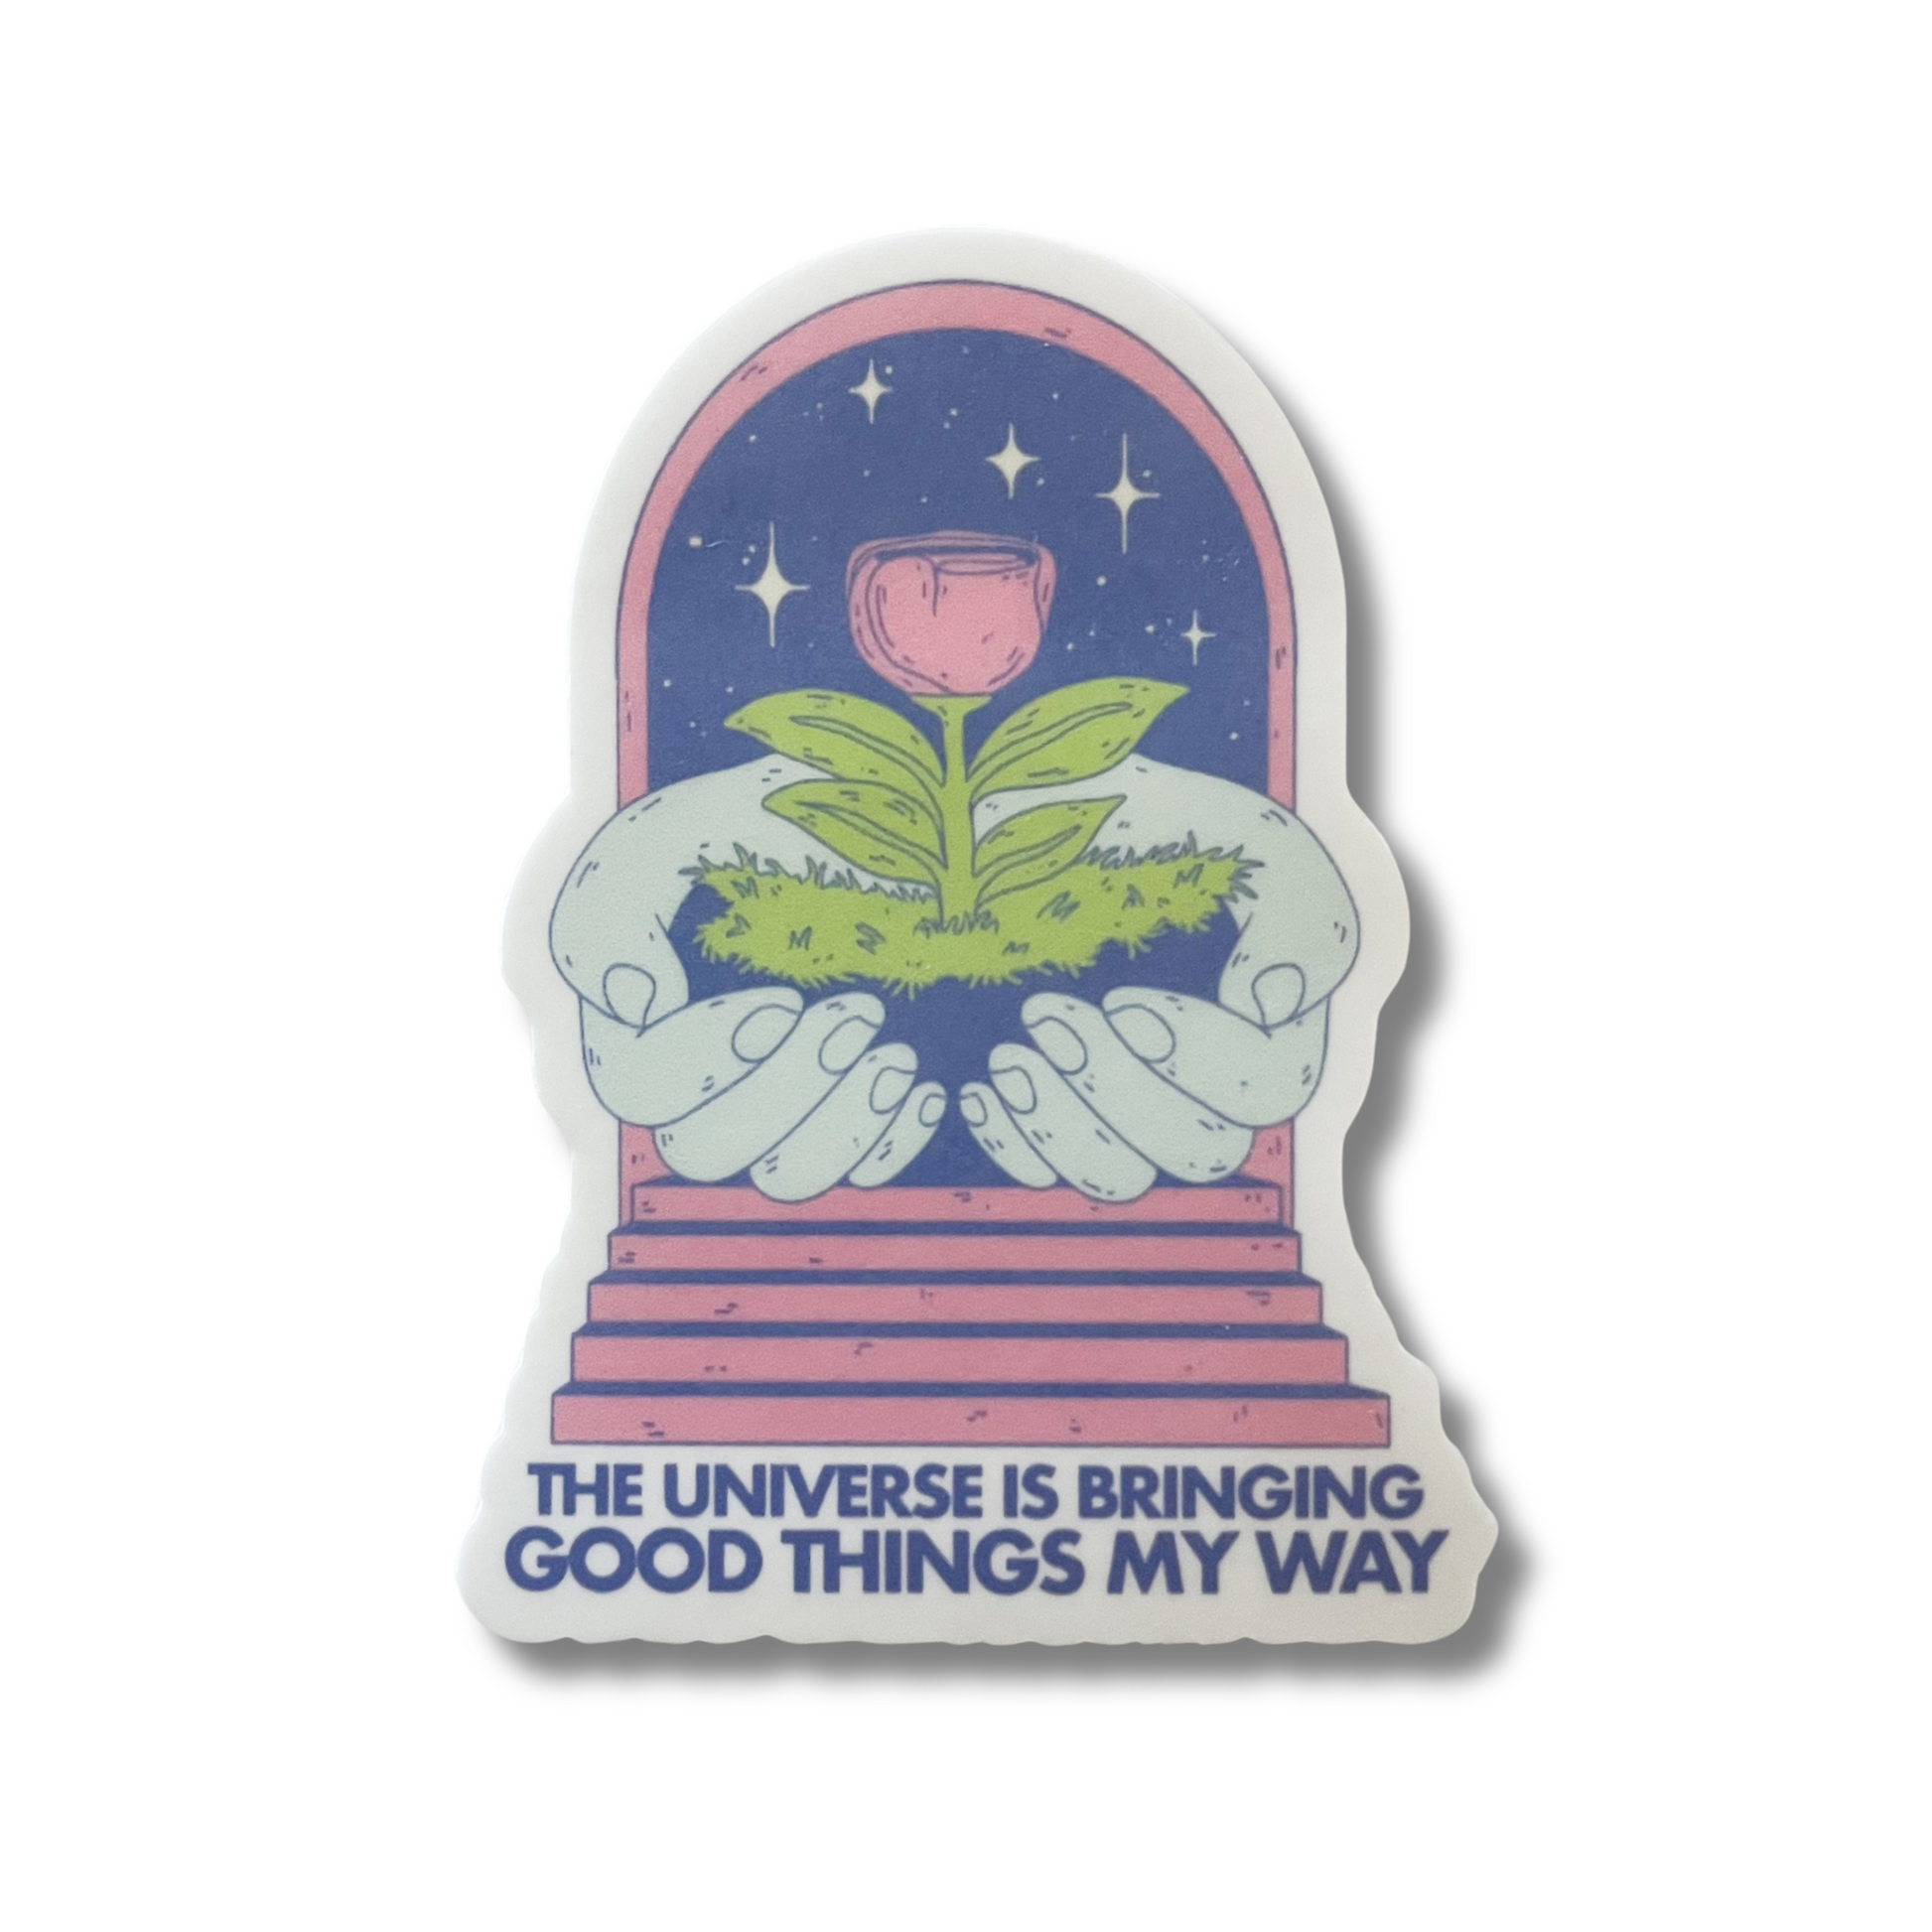 The universe is bringing good things my way, vinyl sticker.